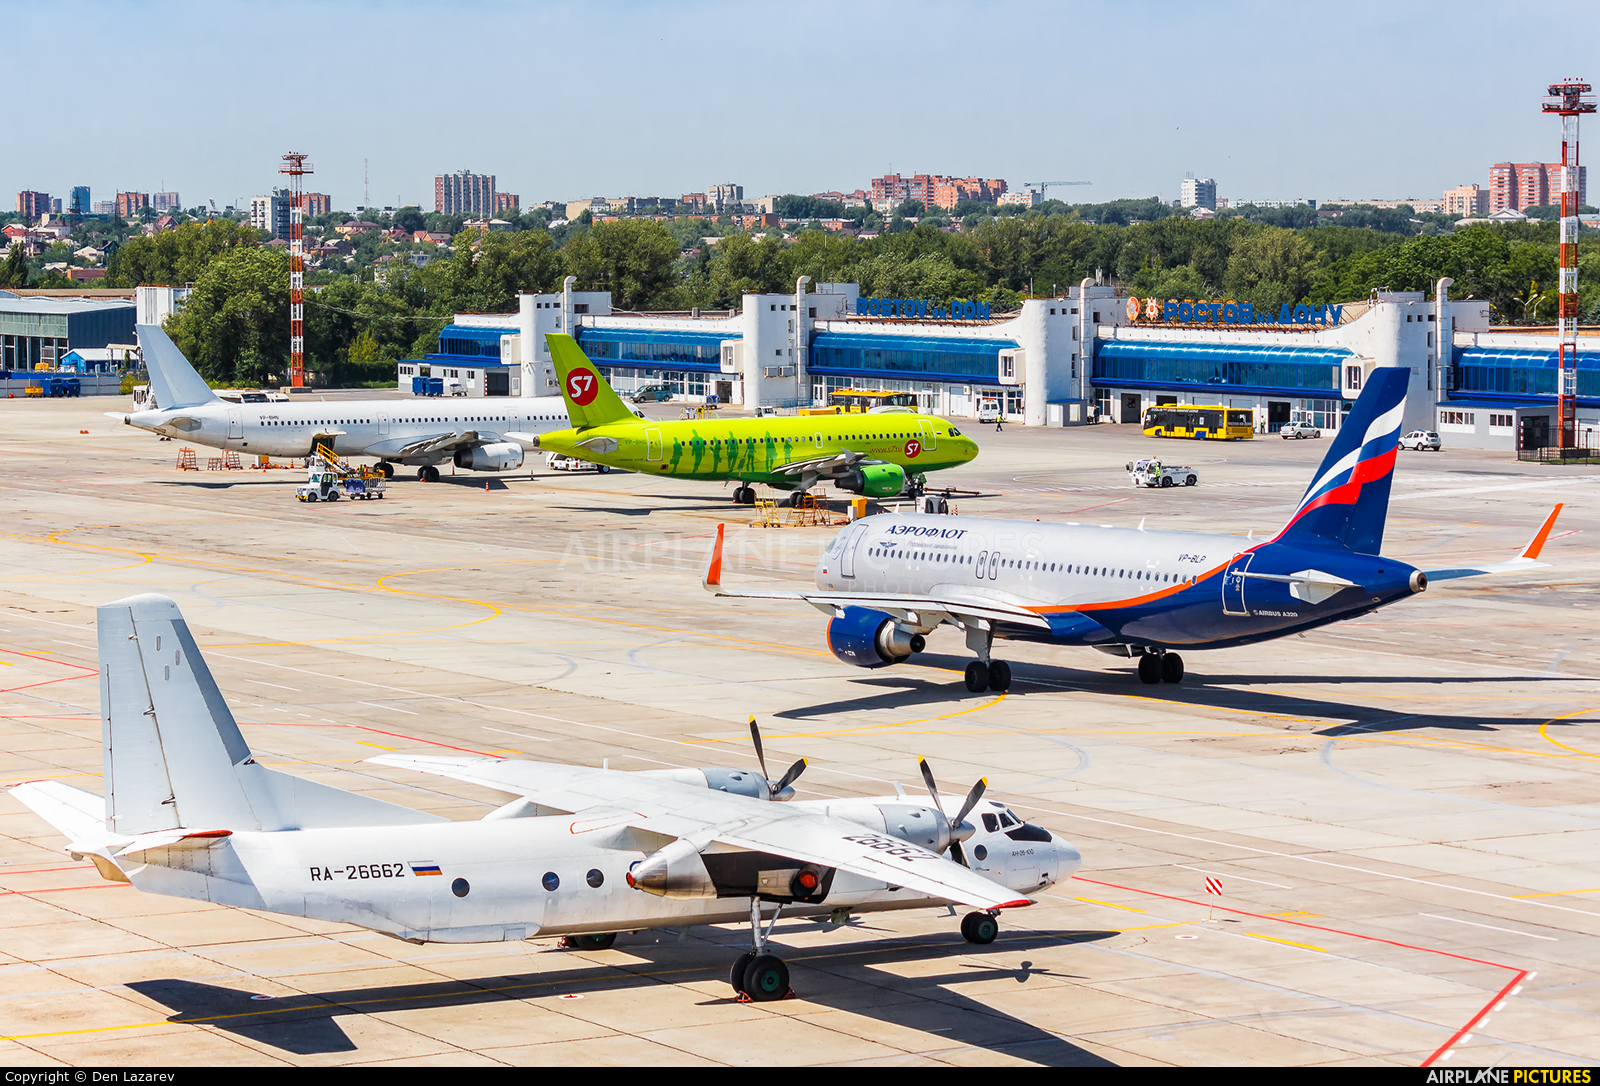 - Airport Overview RA-26662 aircraft at Rostov-on-Don